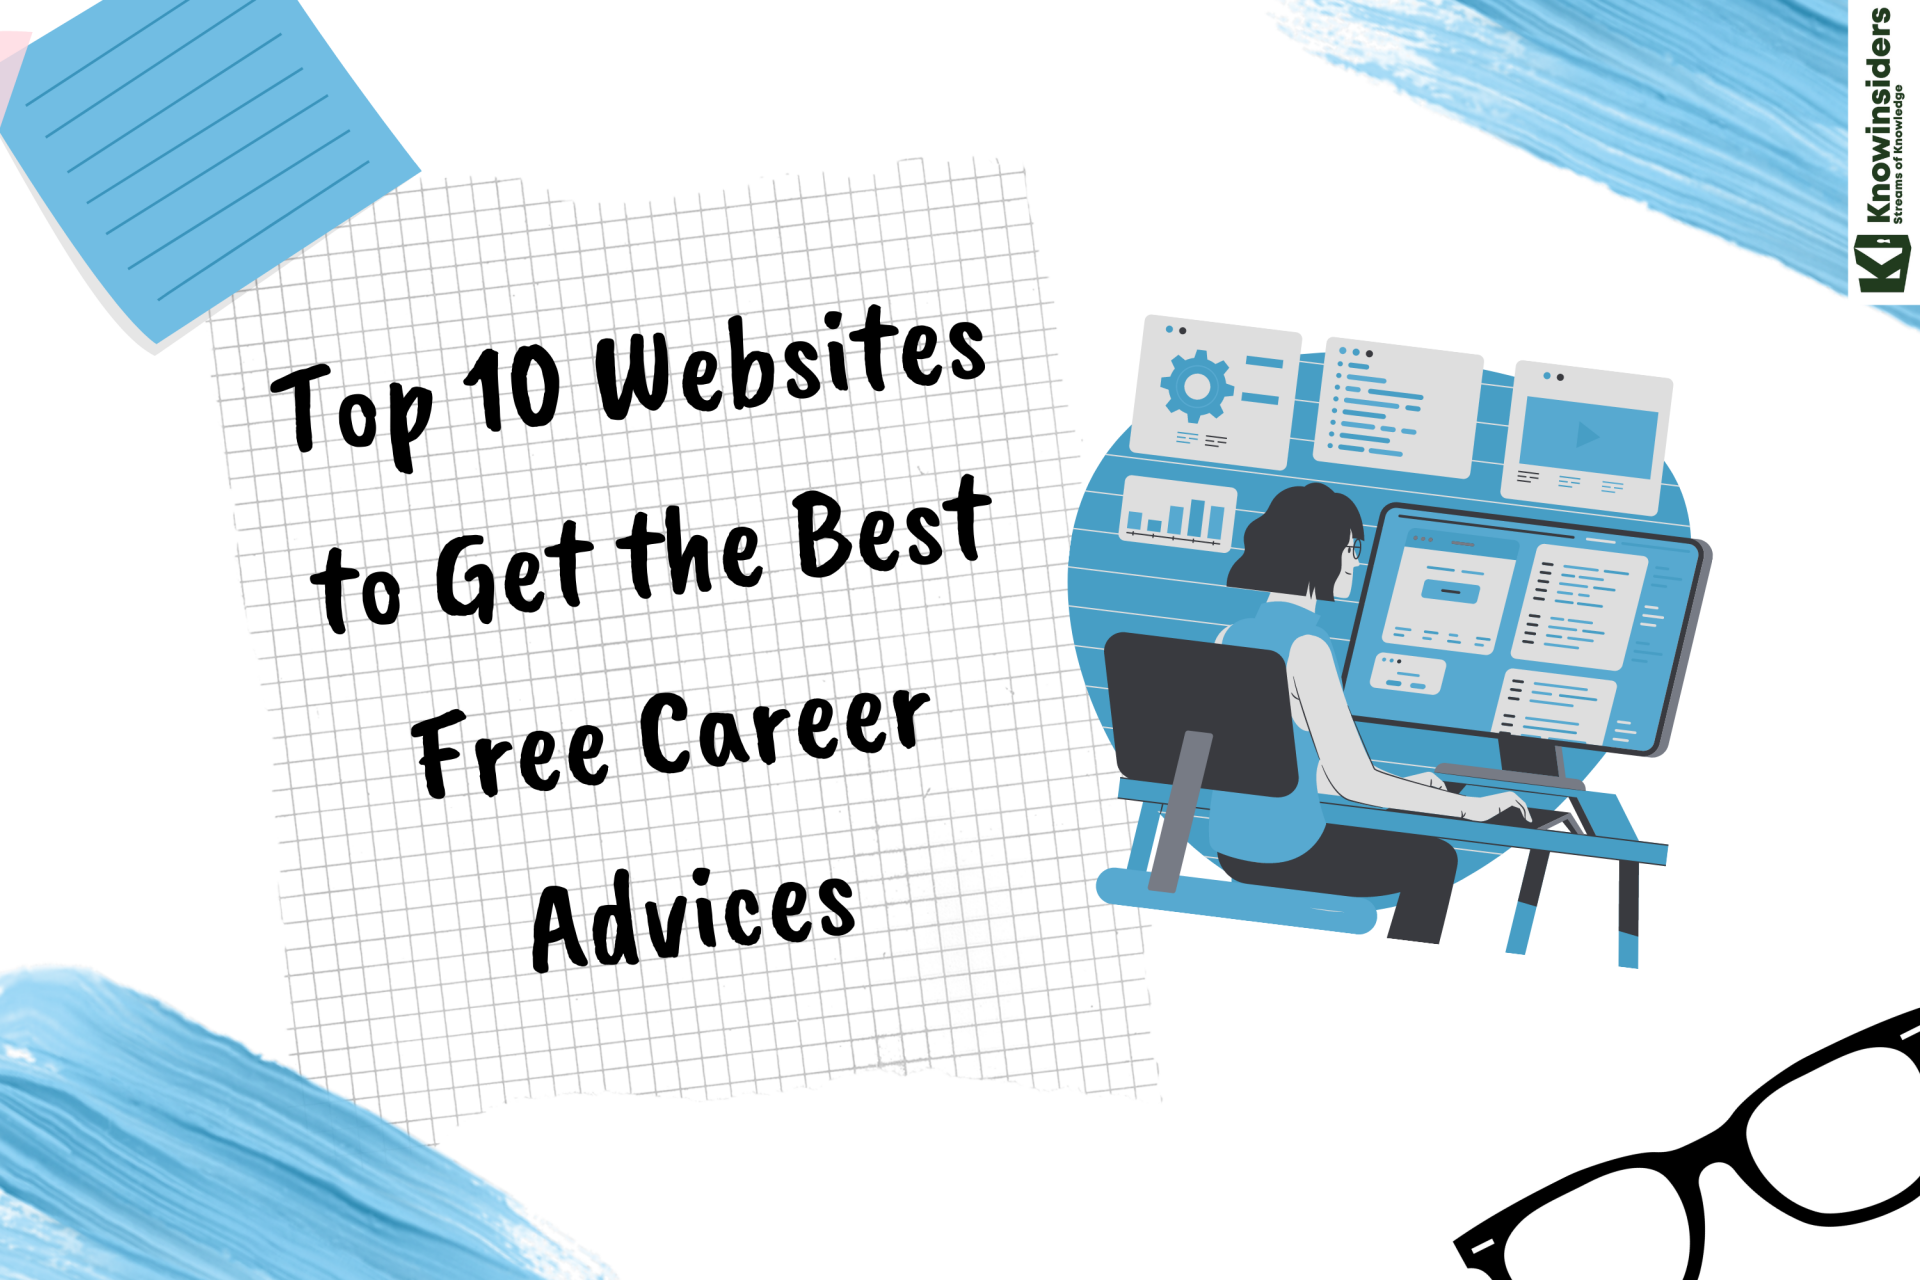 10 Sites to Get the Best Free Career Advices